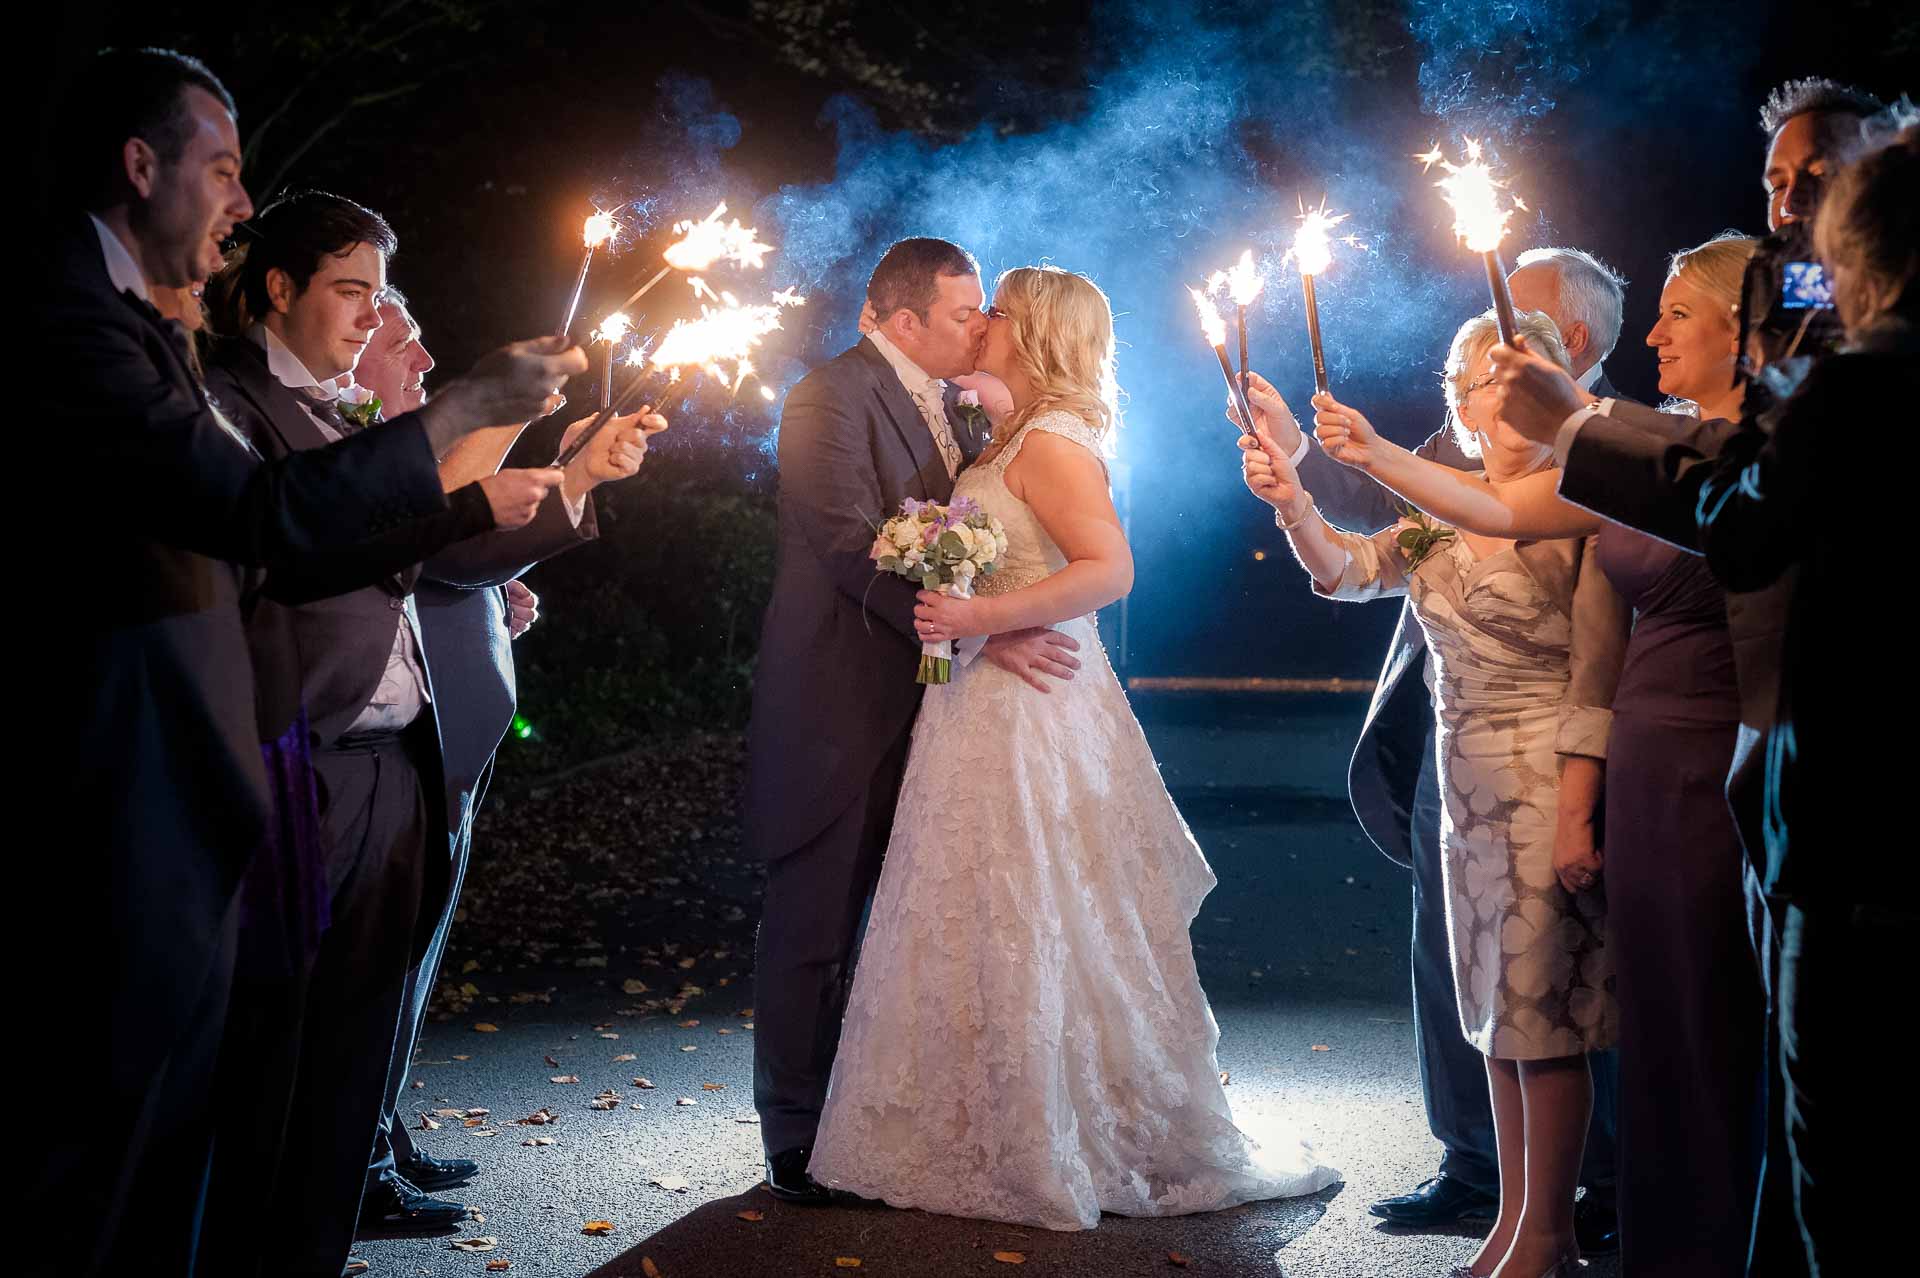 The Sparkler Exit…a How-To Guide